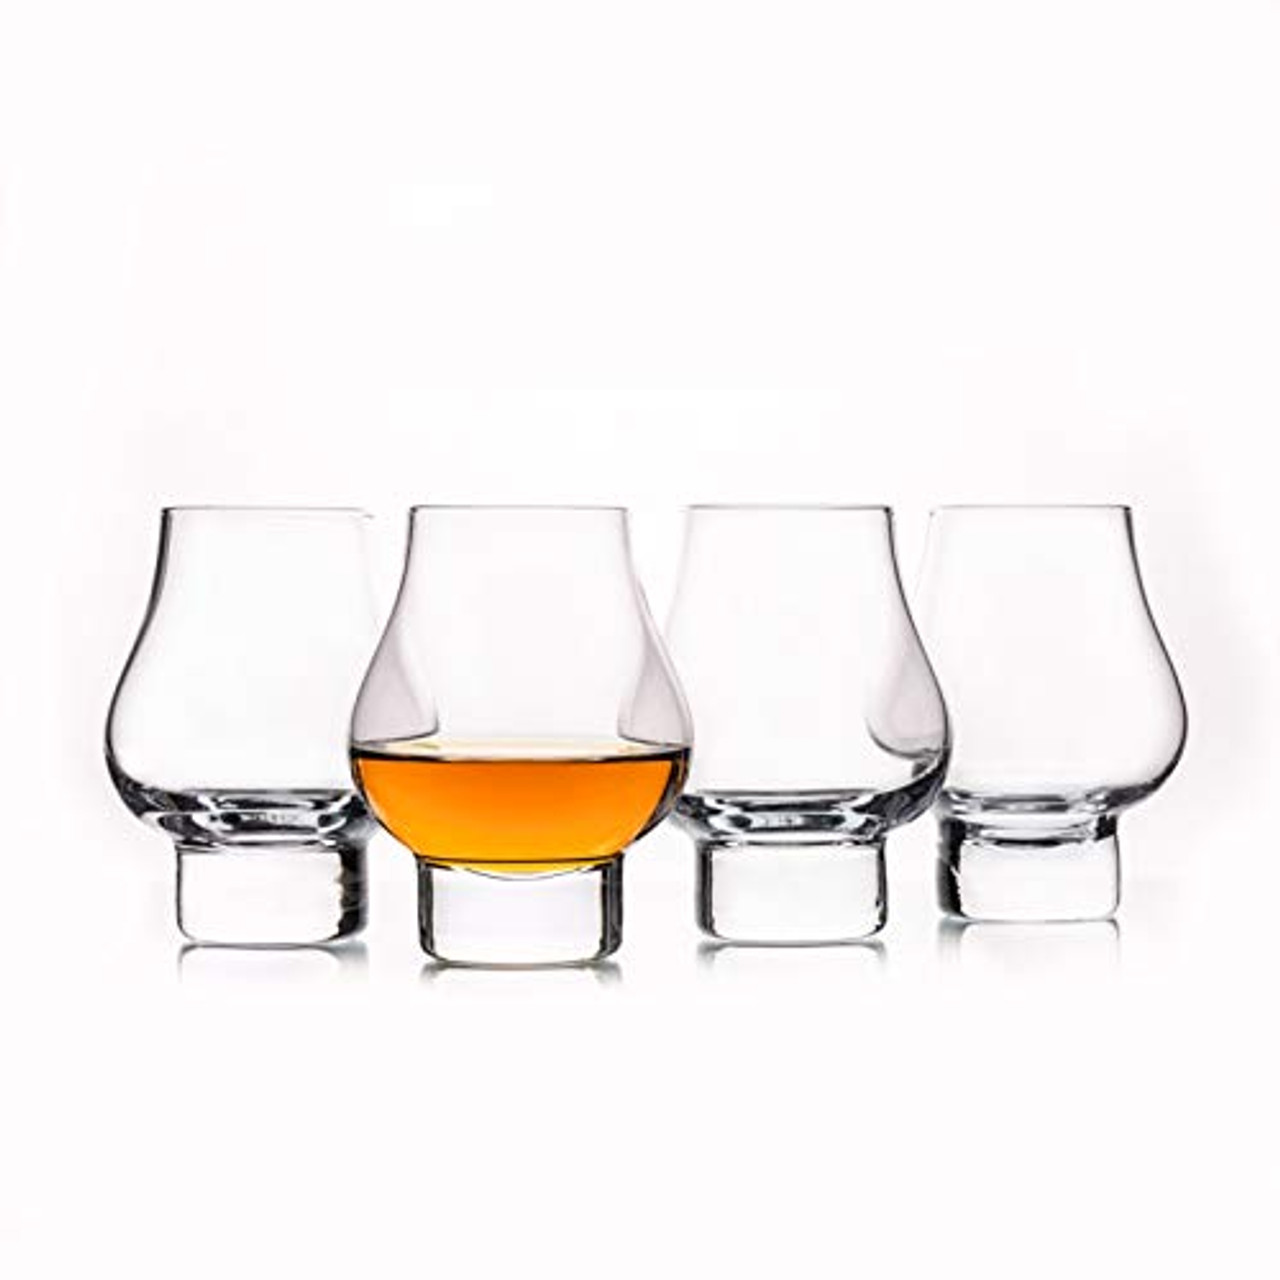 calliva Von Old Fashioned Bourbon Glass, Set of 4 Crystal Whiskey Glasses in Gift Box. Rocks Glass for Scotch Irish Whisky Cocktail Cognac Snifter